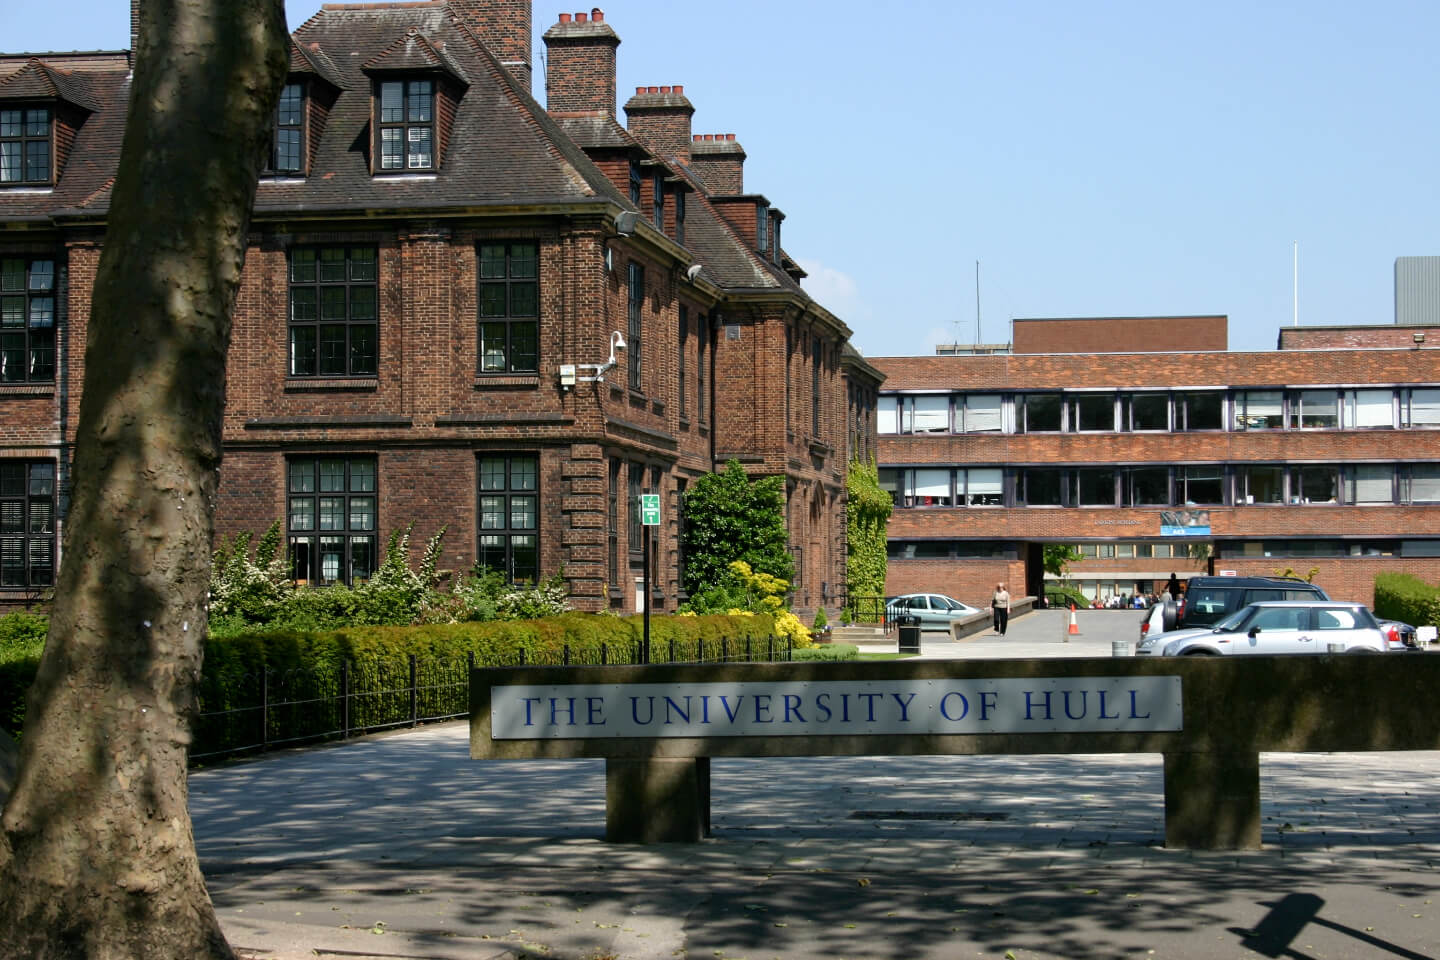 Student Accommodation in Cottingham Road, Hull - The University of Hull main entrance on Cottingham Road